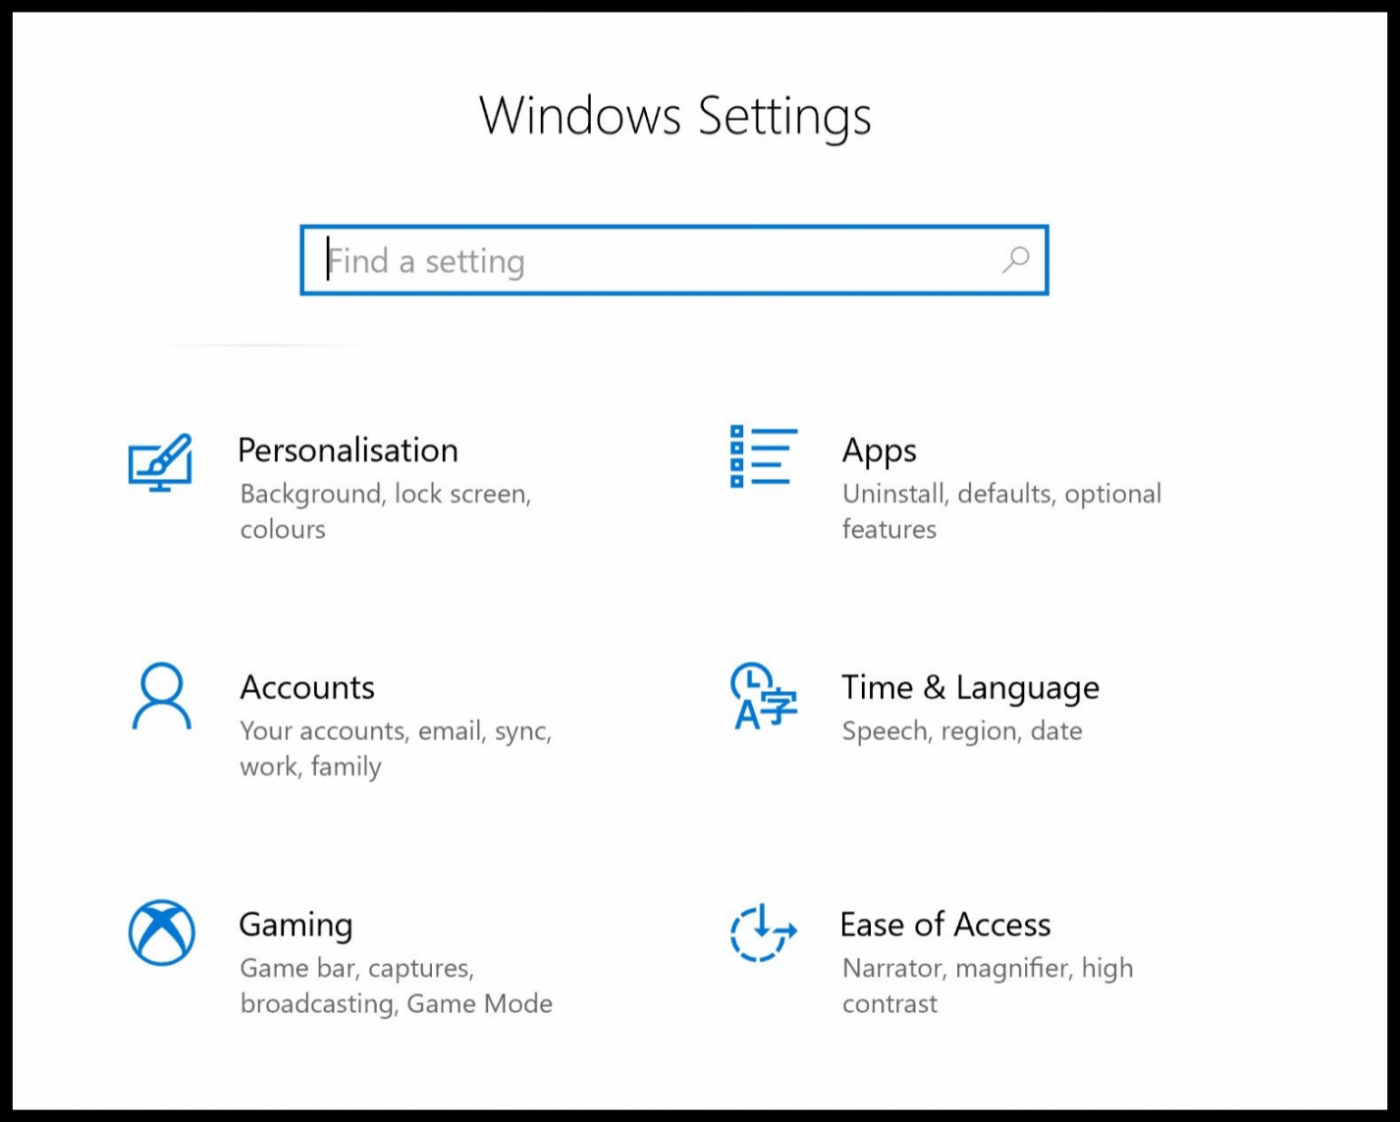 Finding the correct account Windows 10